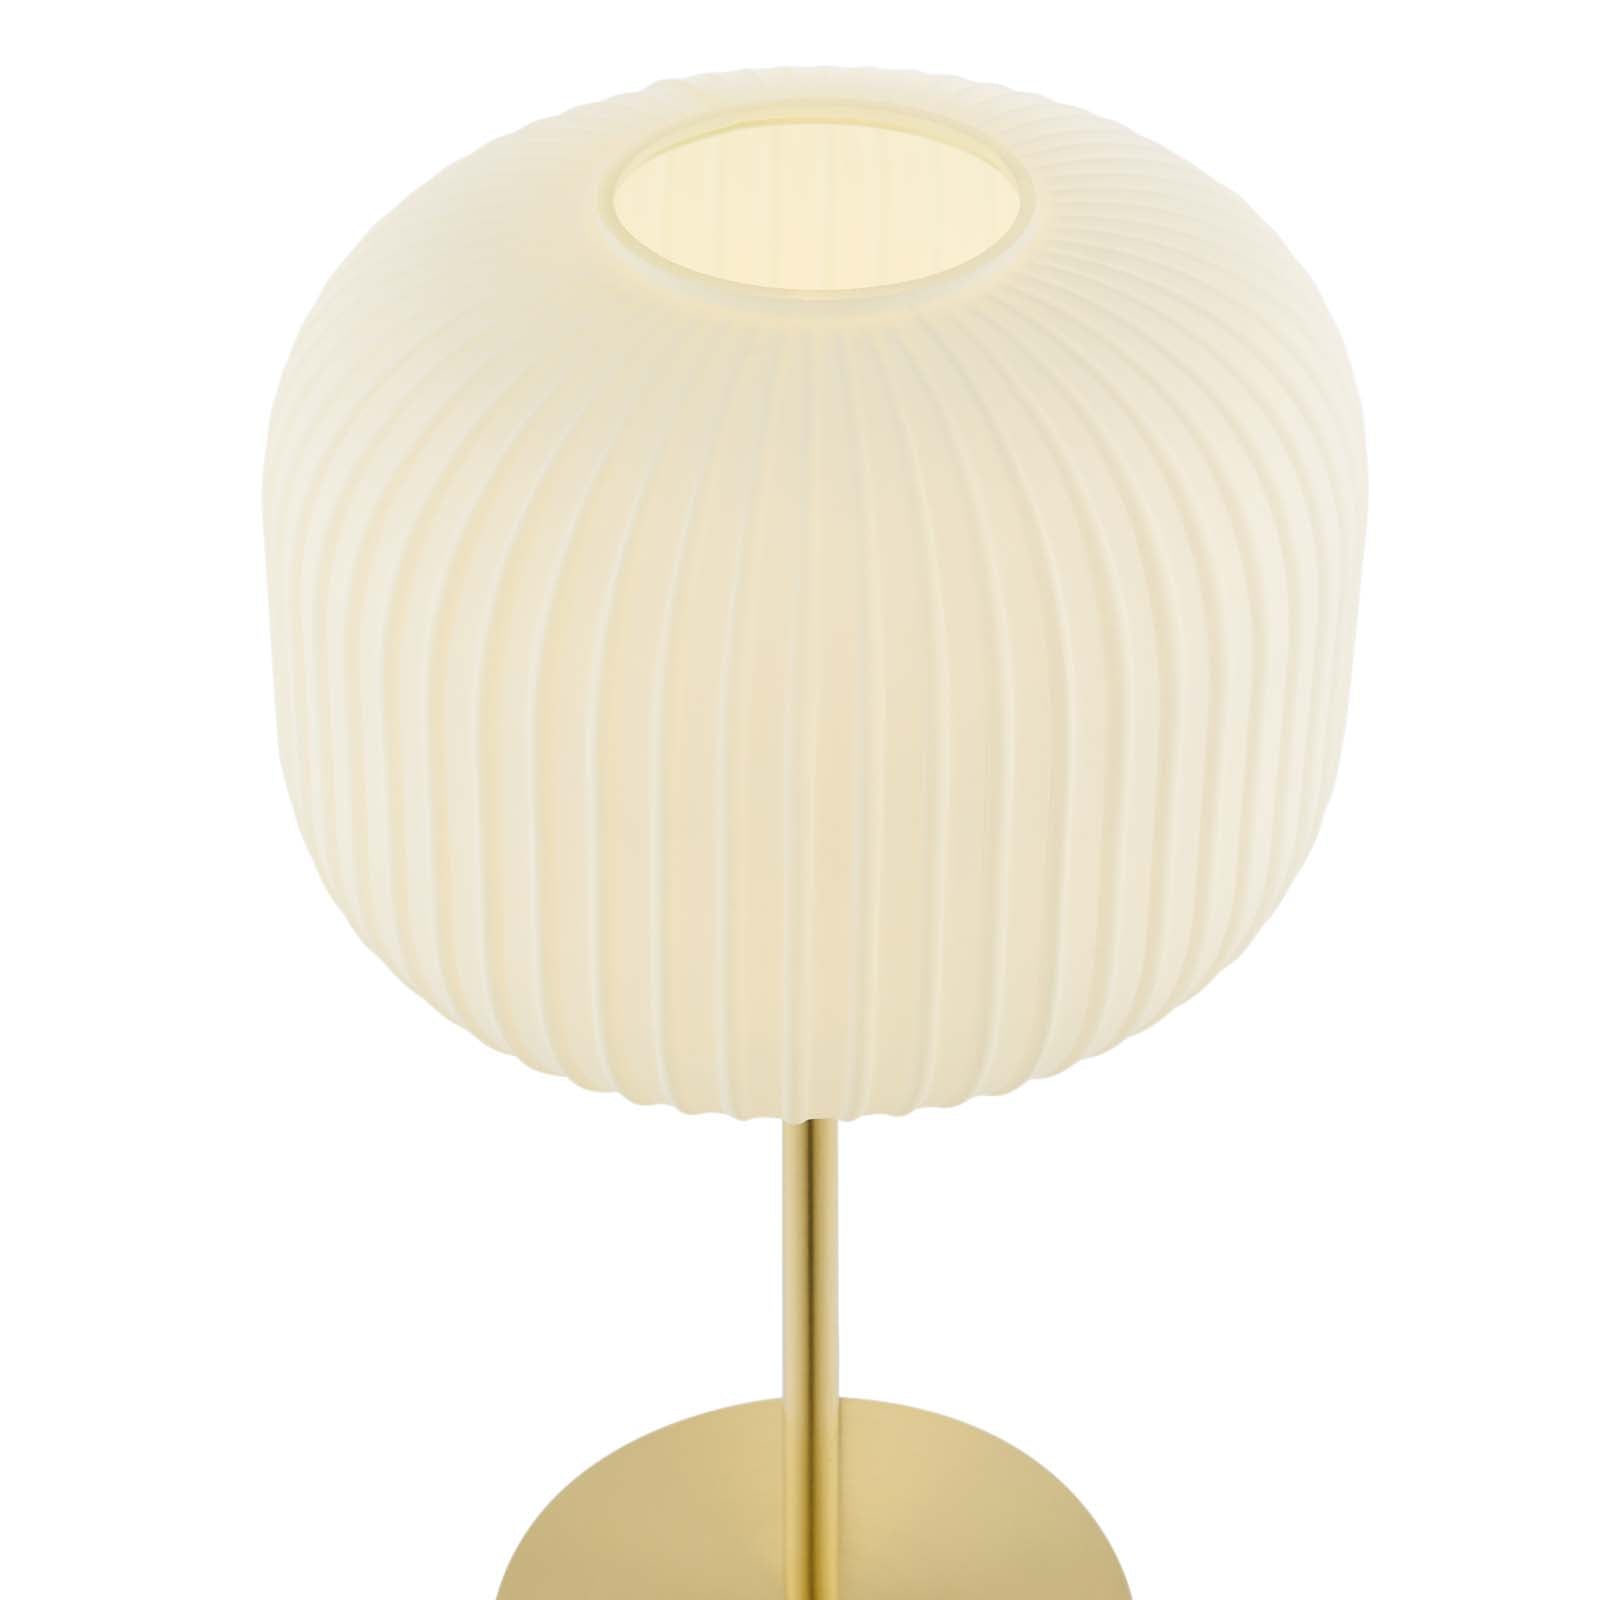 Reprise Glass Sphere Glass and Metal Table Lamp - East Shore Modern Home Furnishings